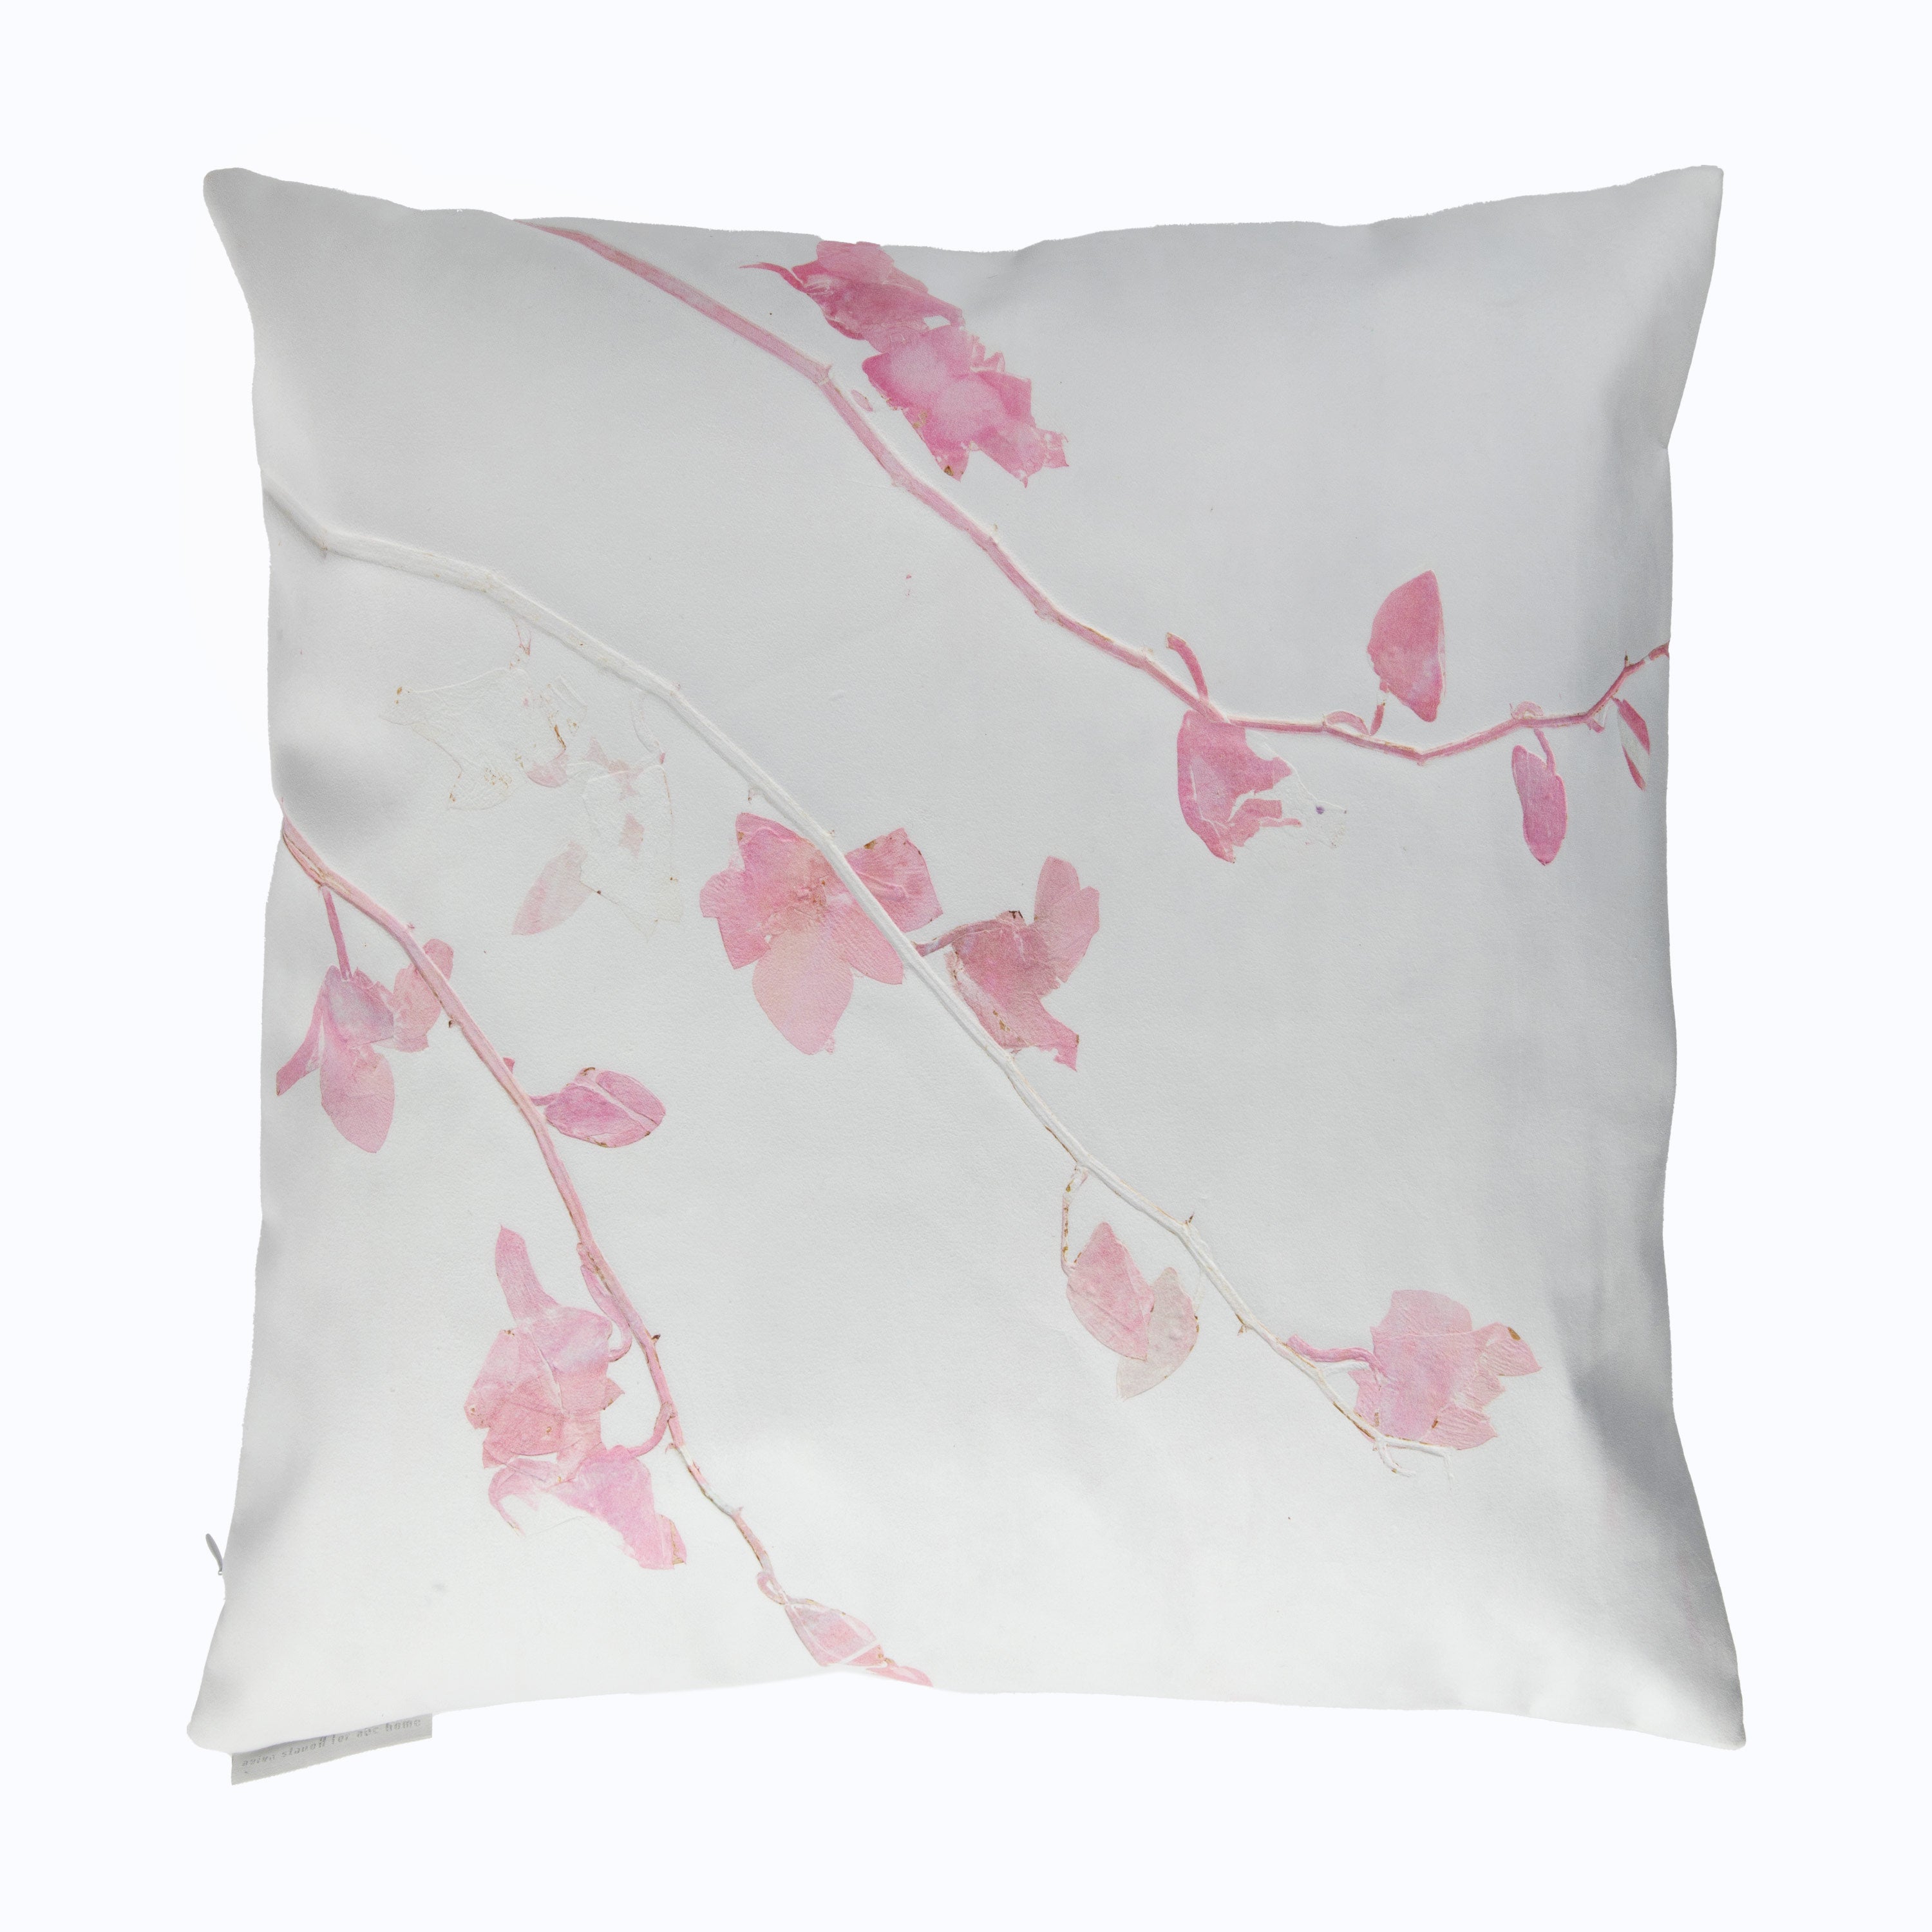 Orchid Eco Suede Pillow, Scarlet